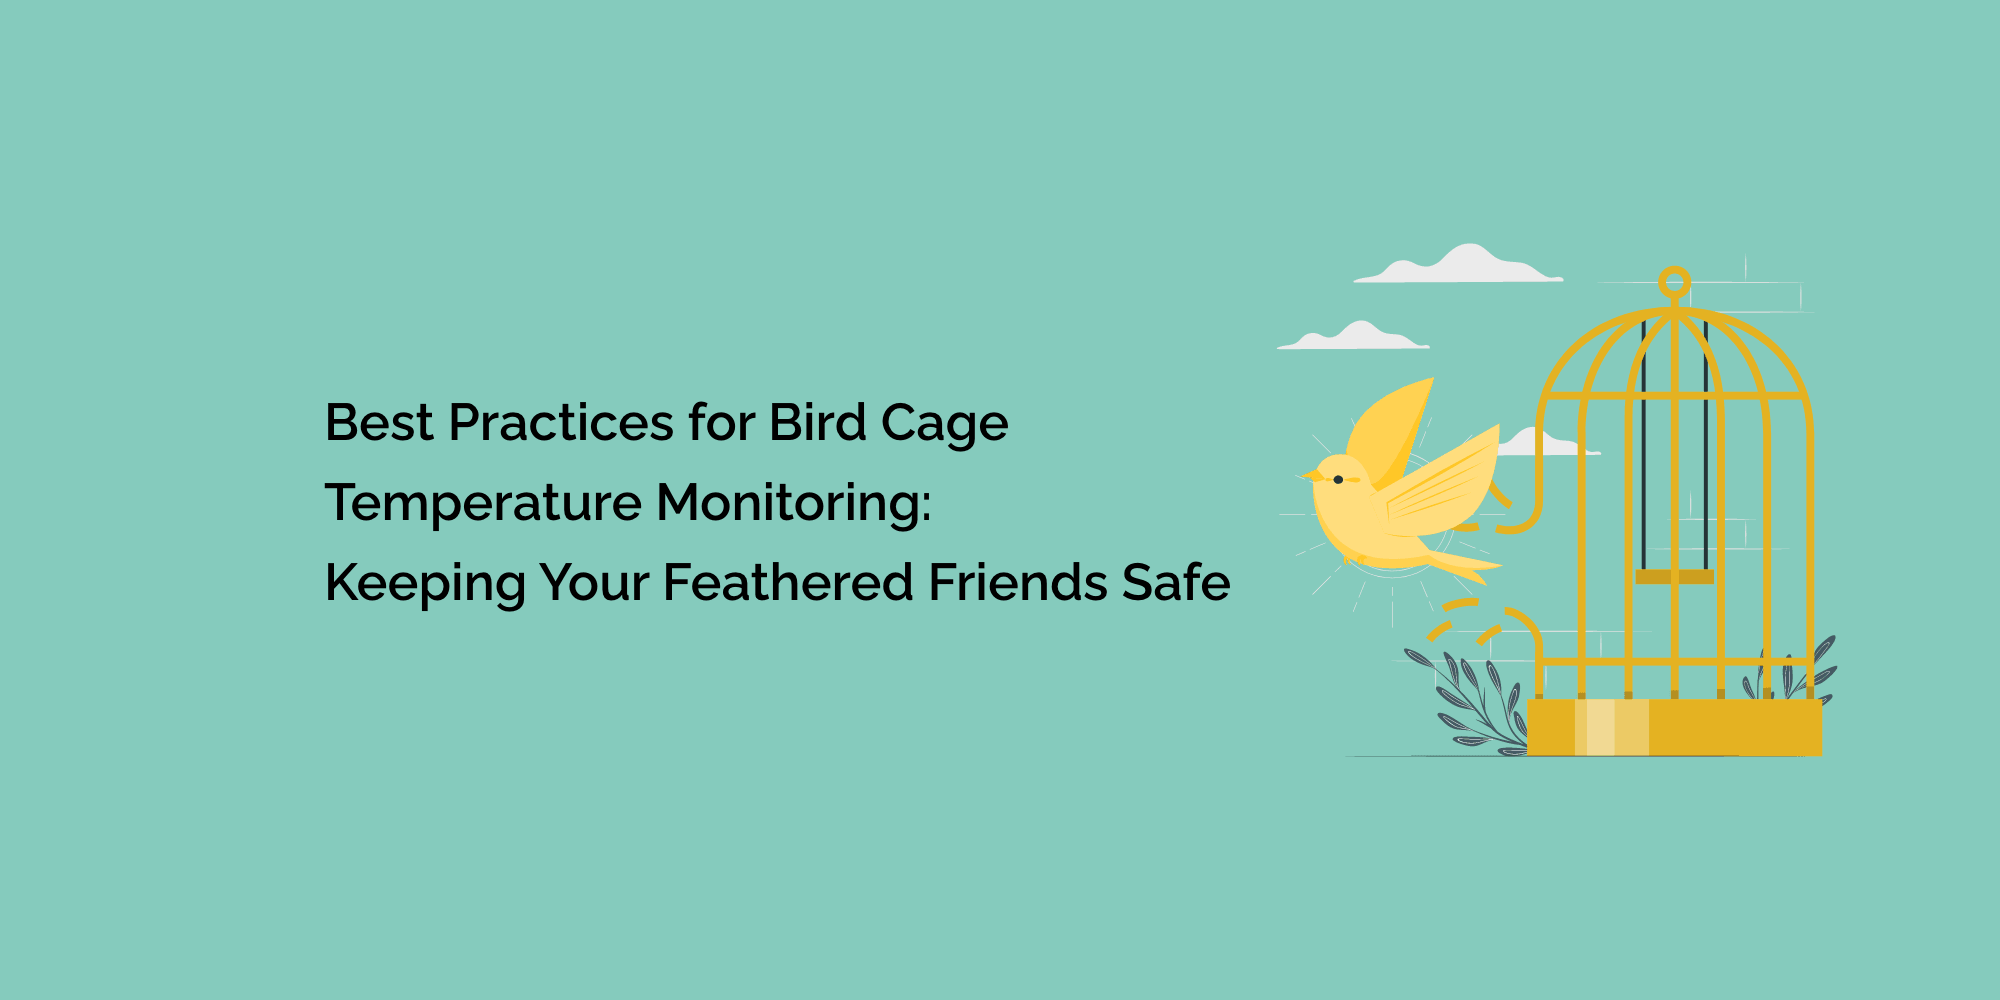 Best Practices for Bird Cage Temperature Monitoring: Keeping Your Feathered Friends Safe